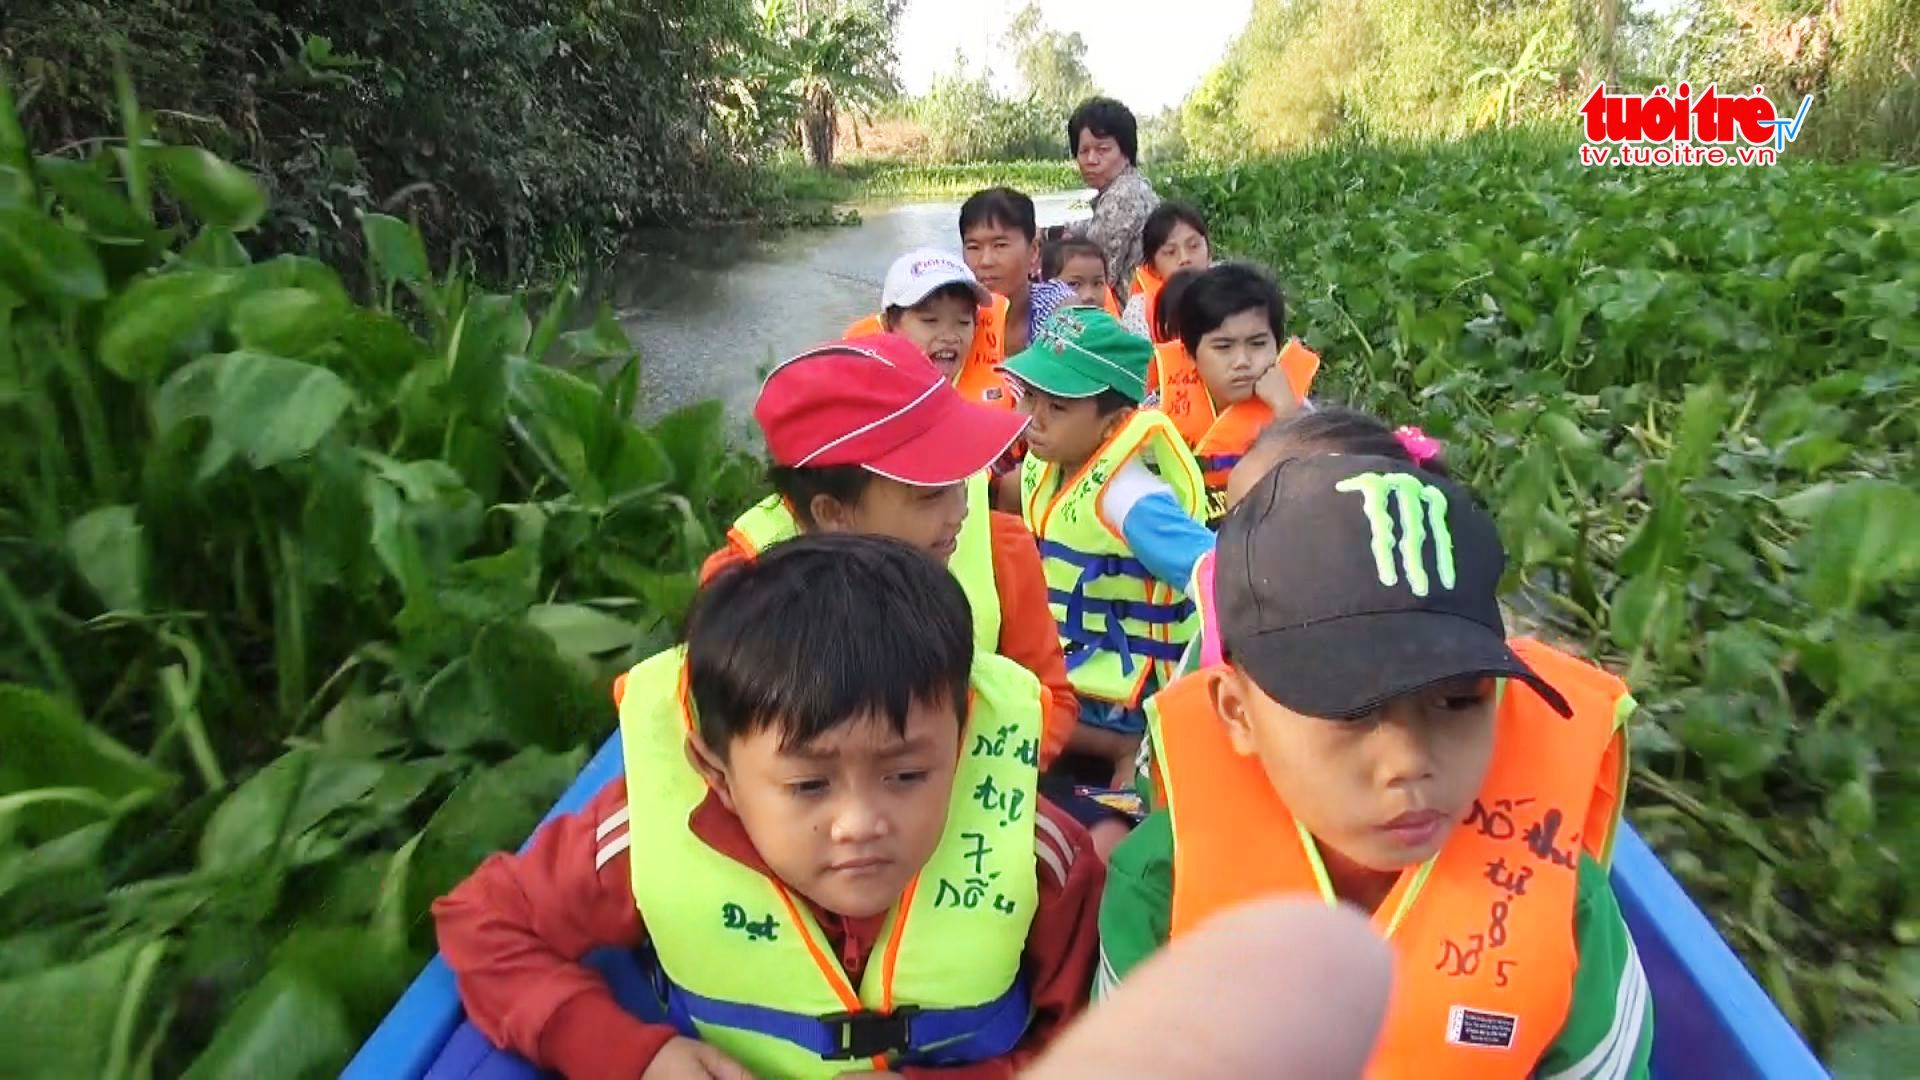 Old lady shuttling young students by boat for free